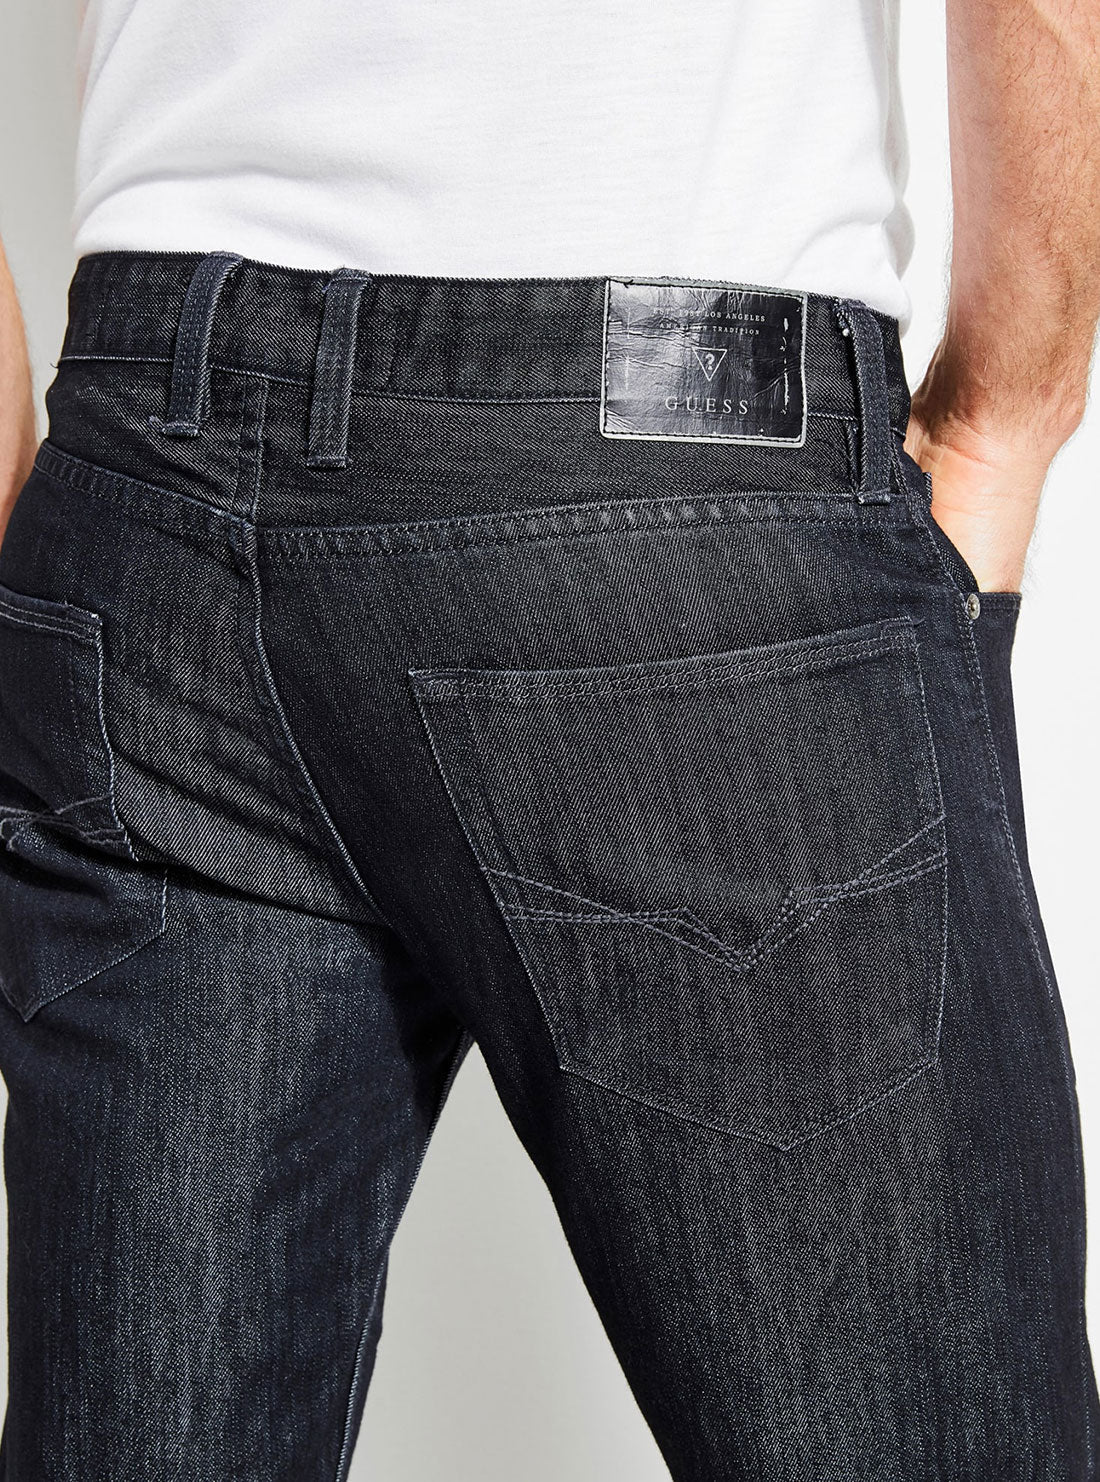 GUESS Mens Low-Rise Slim Straight Denim Jeans in Smokescreen Wash MB3AS121OD0 Detail View